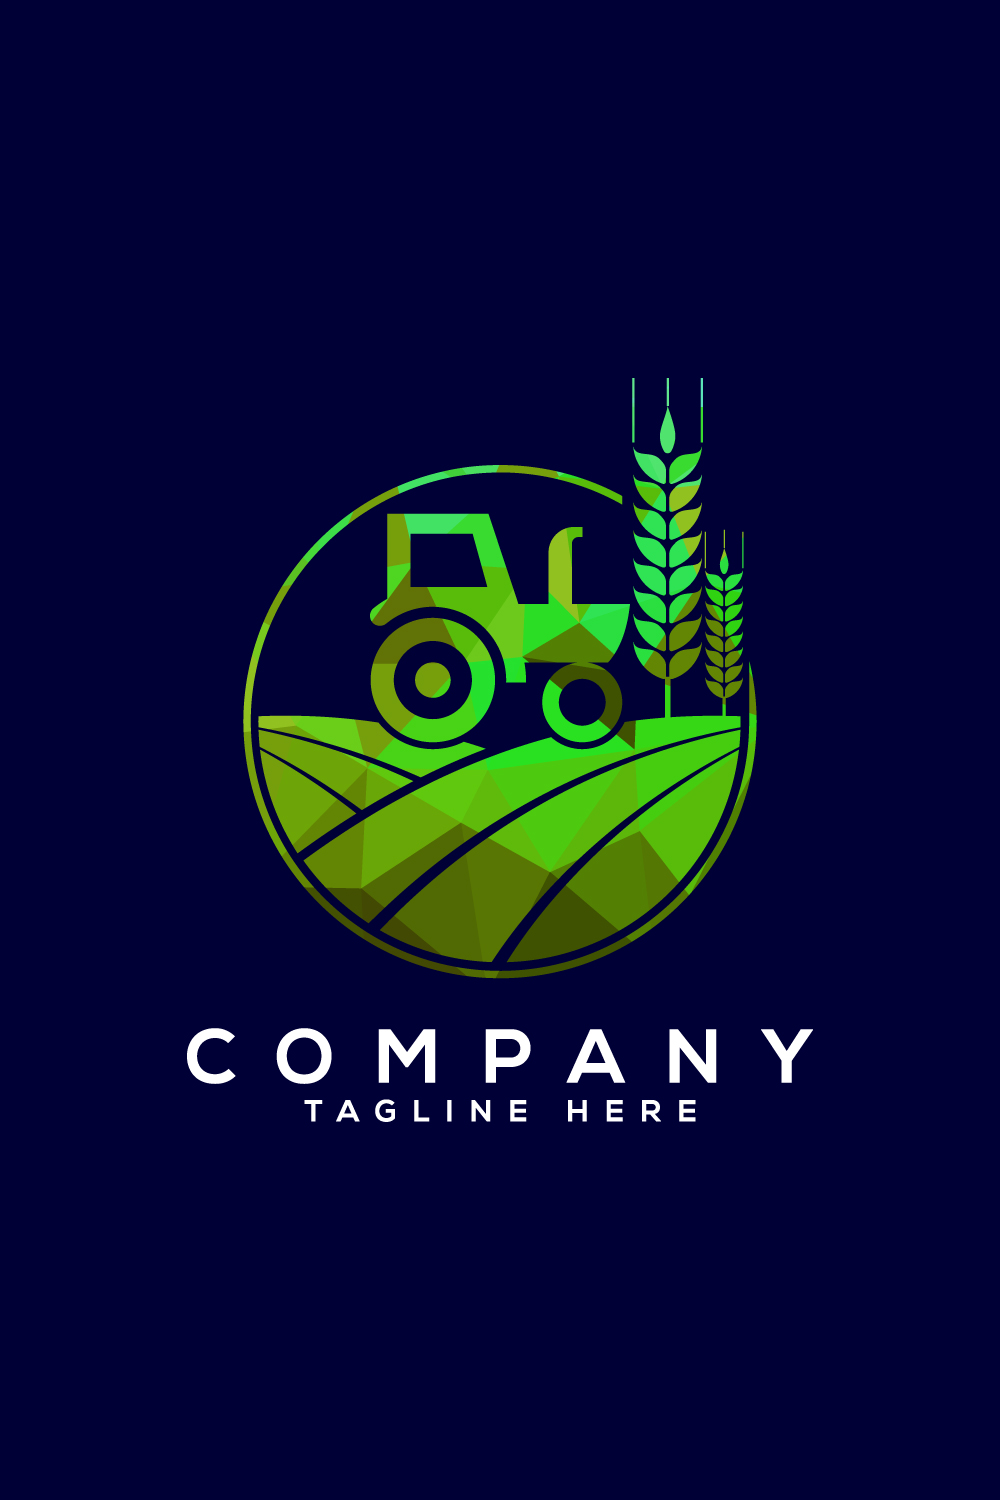 Tractor or farm low poly style logo design, suitable for any business related to agriculture industries pinterest preview image.